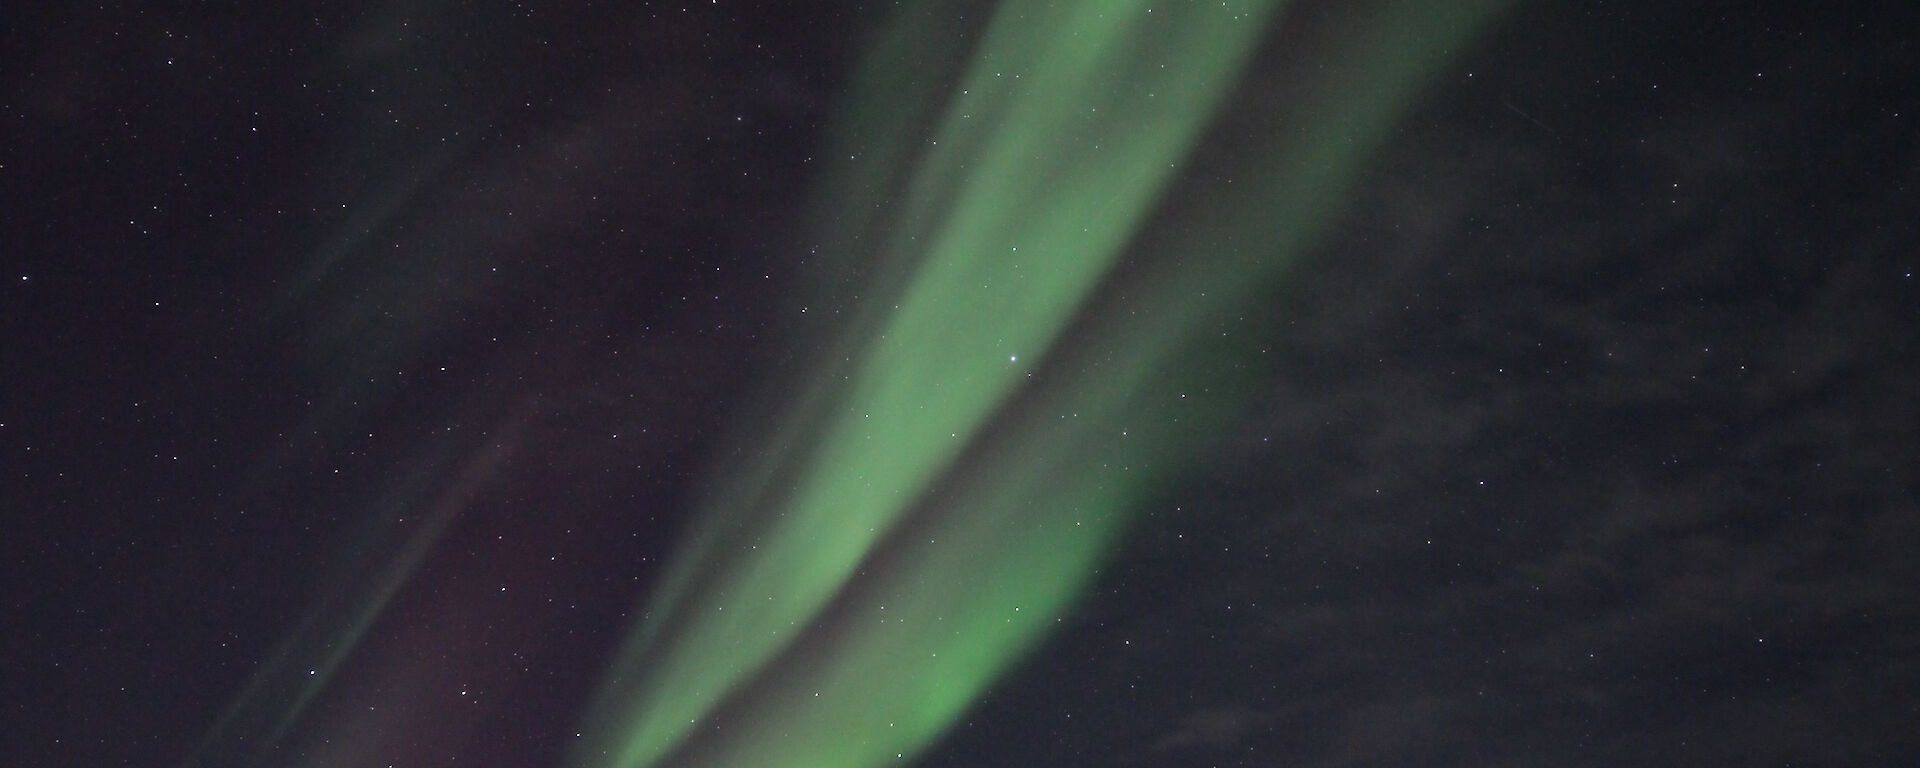 A green aurora from the horizon up into the night sky